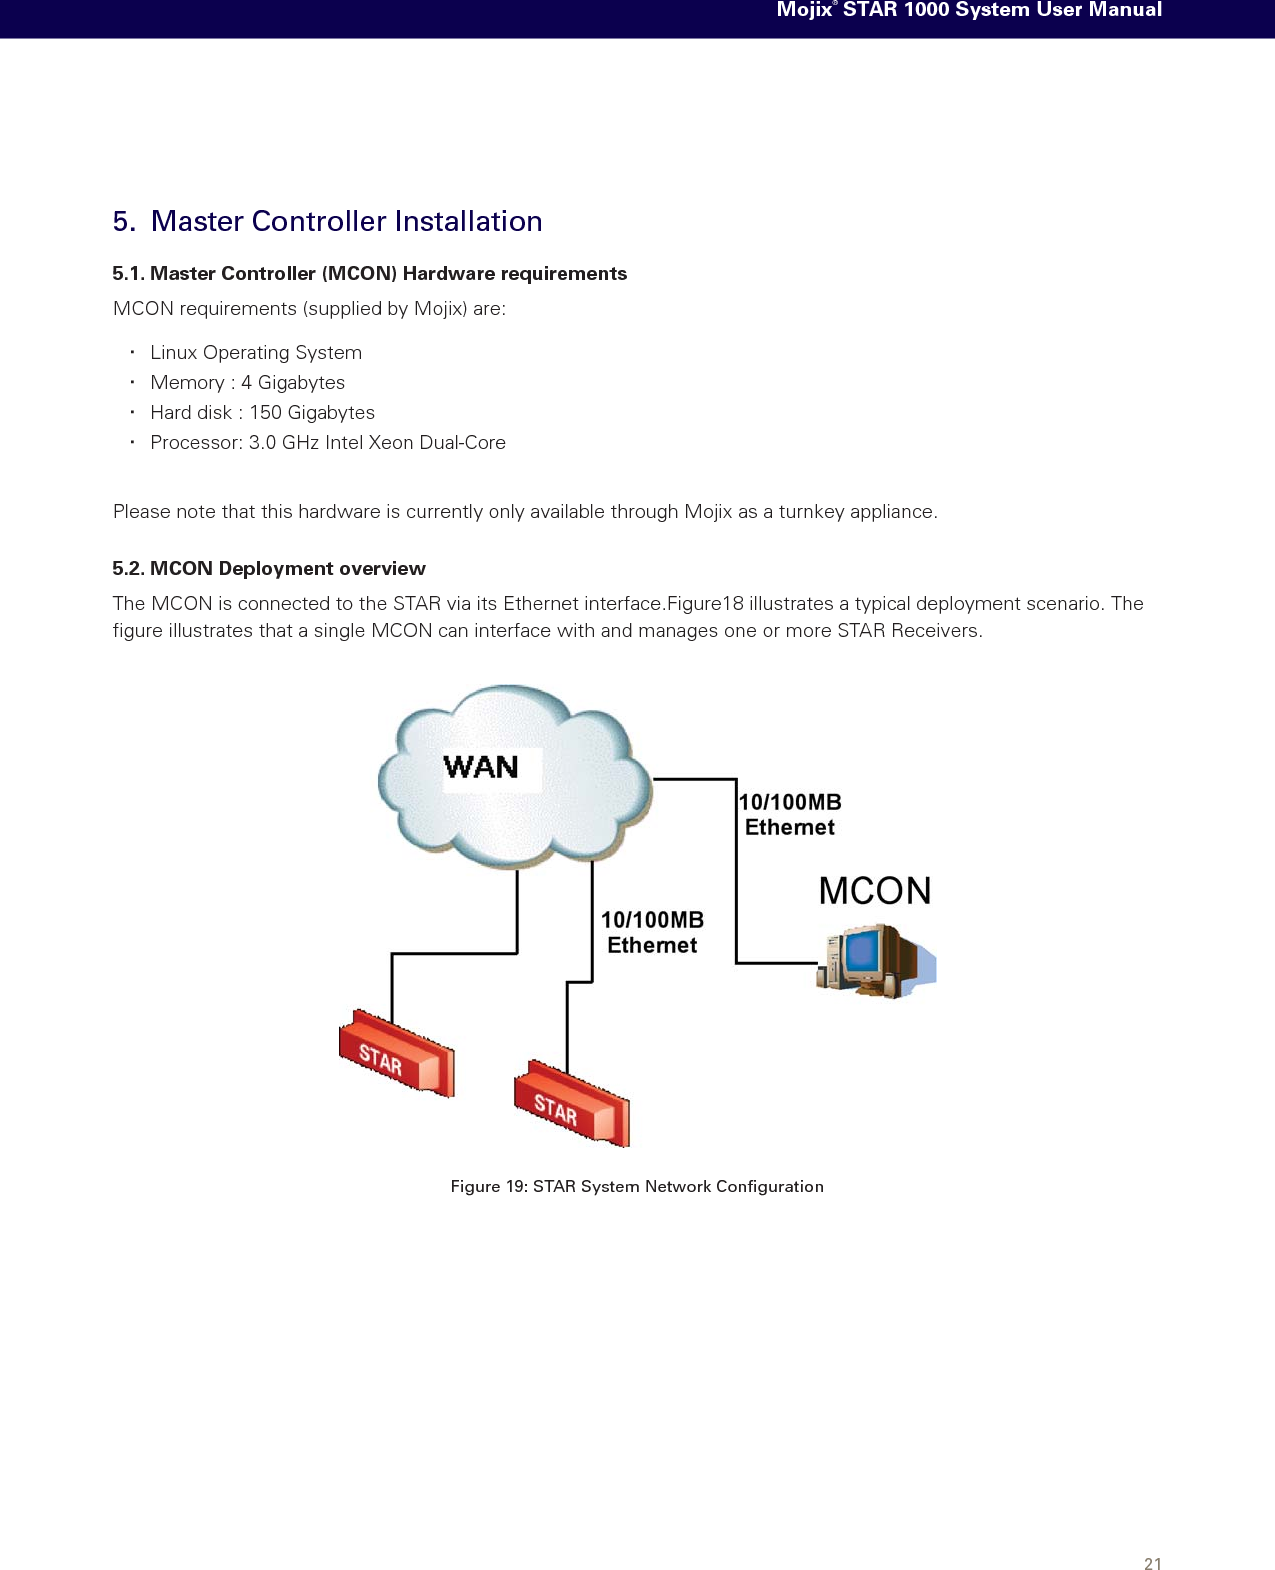 Mojix® STAR 1000 System User Manual215.  Master Controller Installation5.1. Master Controller (MCON) Hardware requirementsMCON requirements (supplied by Mojix) are:Linux Operating System †Memory : 4 Gigabytes †Hard disk : 150 Gigabytes †Processor: 3.0 GHz Intel Xeon Dual-Core †Please note that this hardware is currently only available through Mojix as a turnkey appliance.5.2. MCON Deployment overviewThe MCON is connected to the STAR via its Ethernet interface.Figure18 illustrates a typical deployment scenario. The ﬁgure illustrates that a single MCON can interface with and manages one or more STAR Receivers.  Figure 19: STAR System Network Conﬁguration